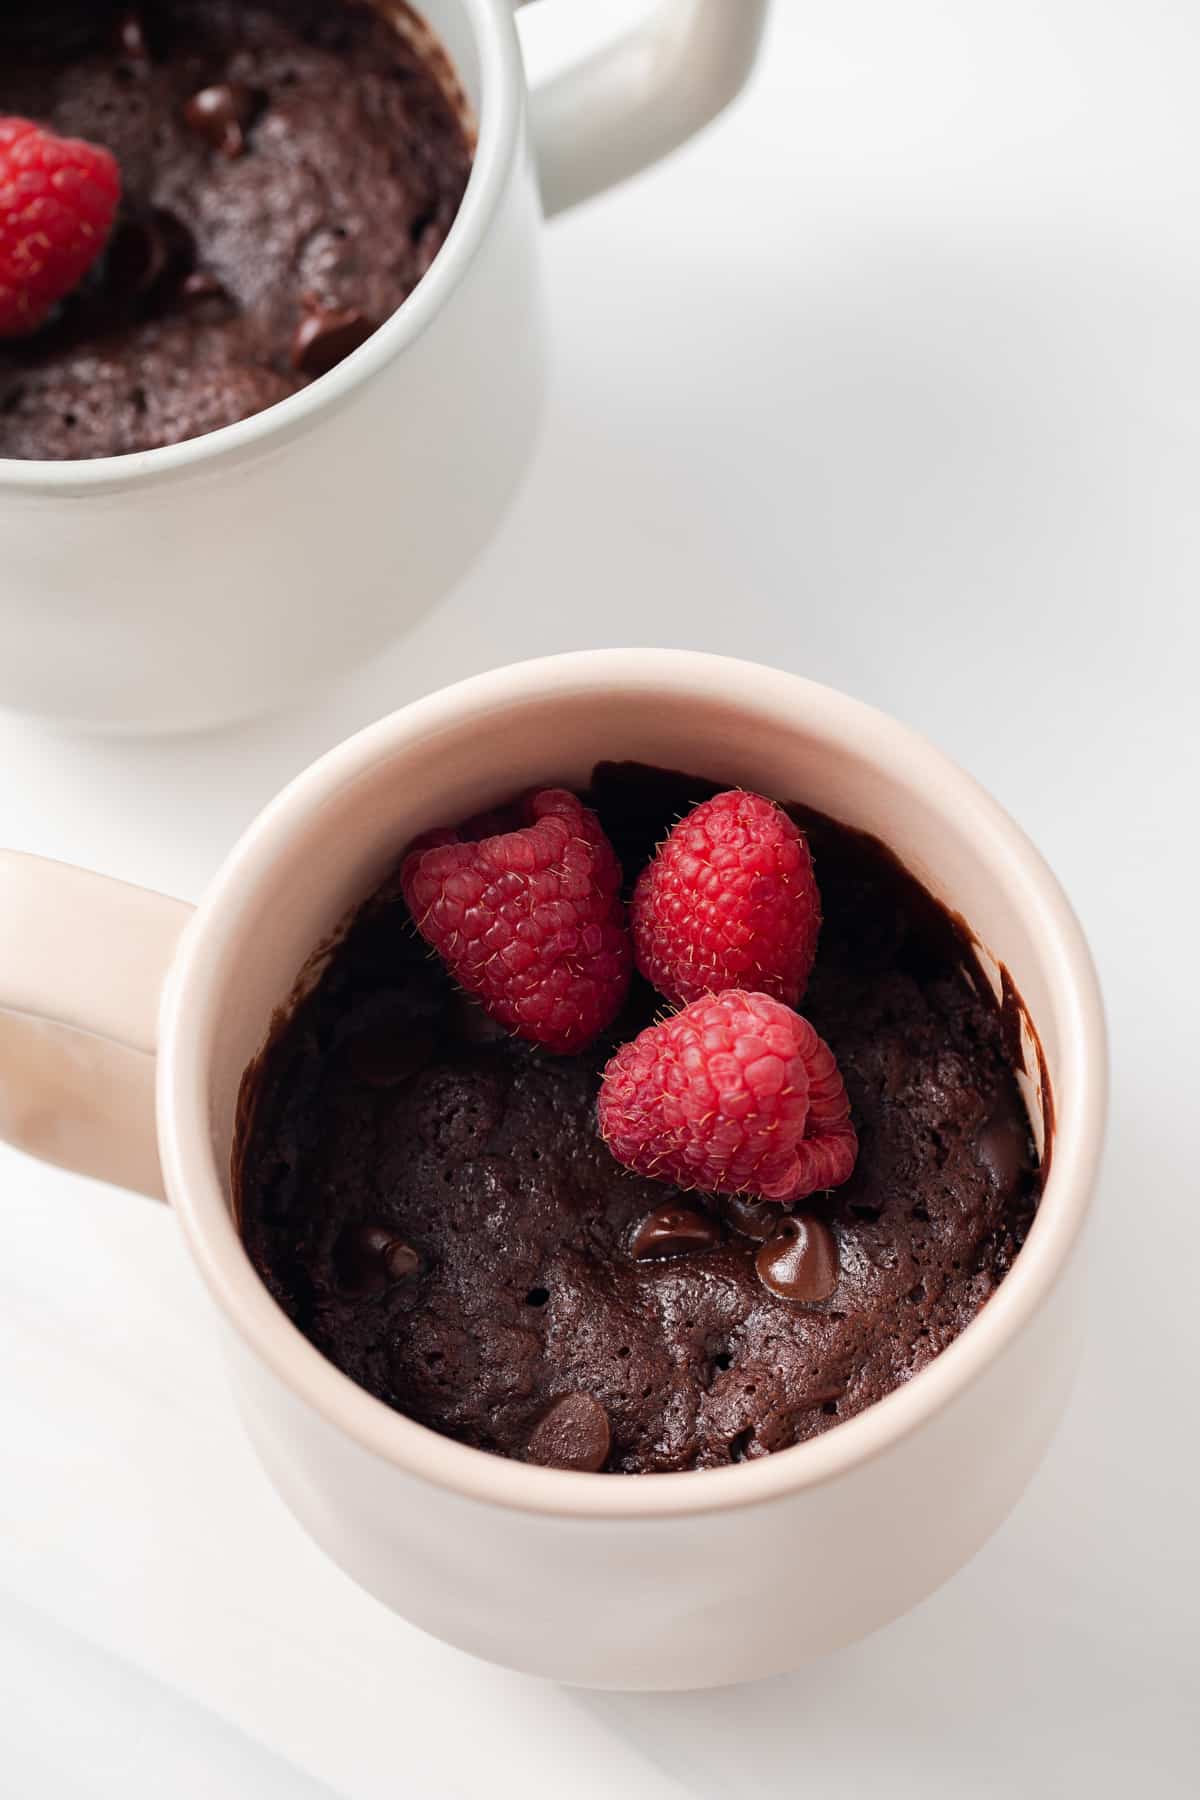 Brownie in a mug topped with raspberries.